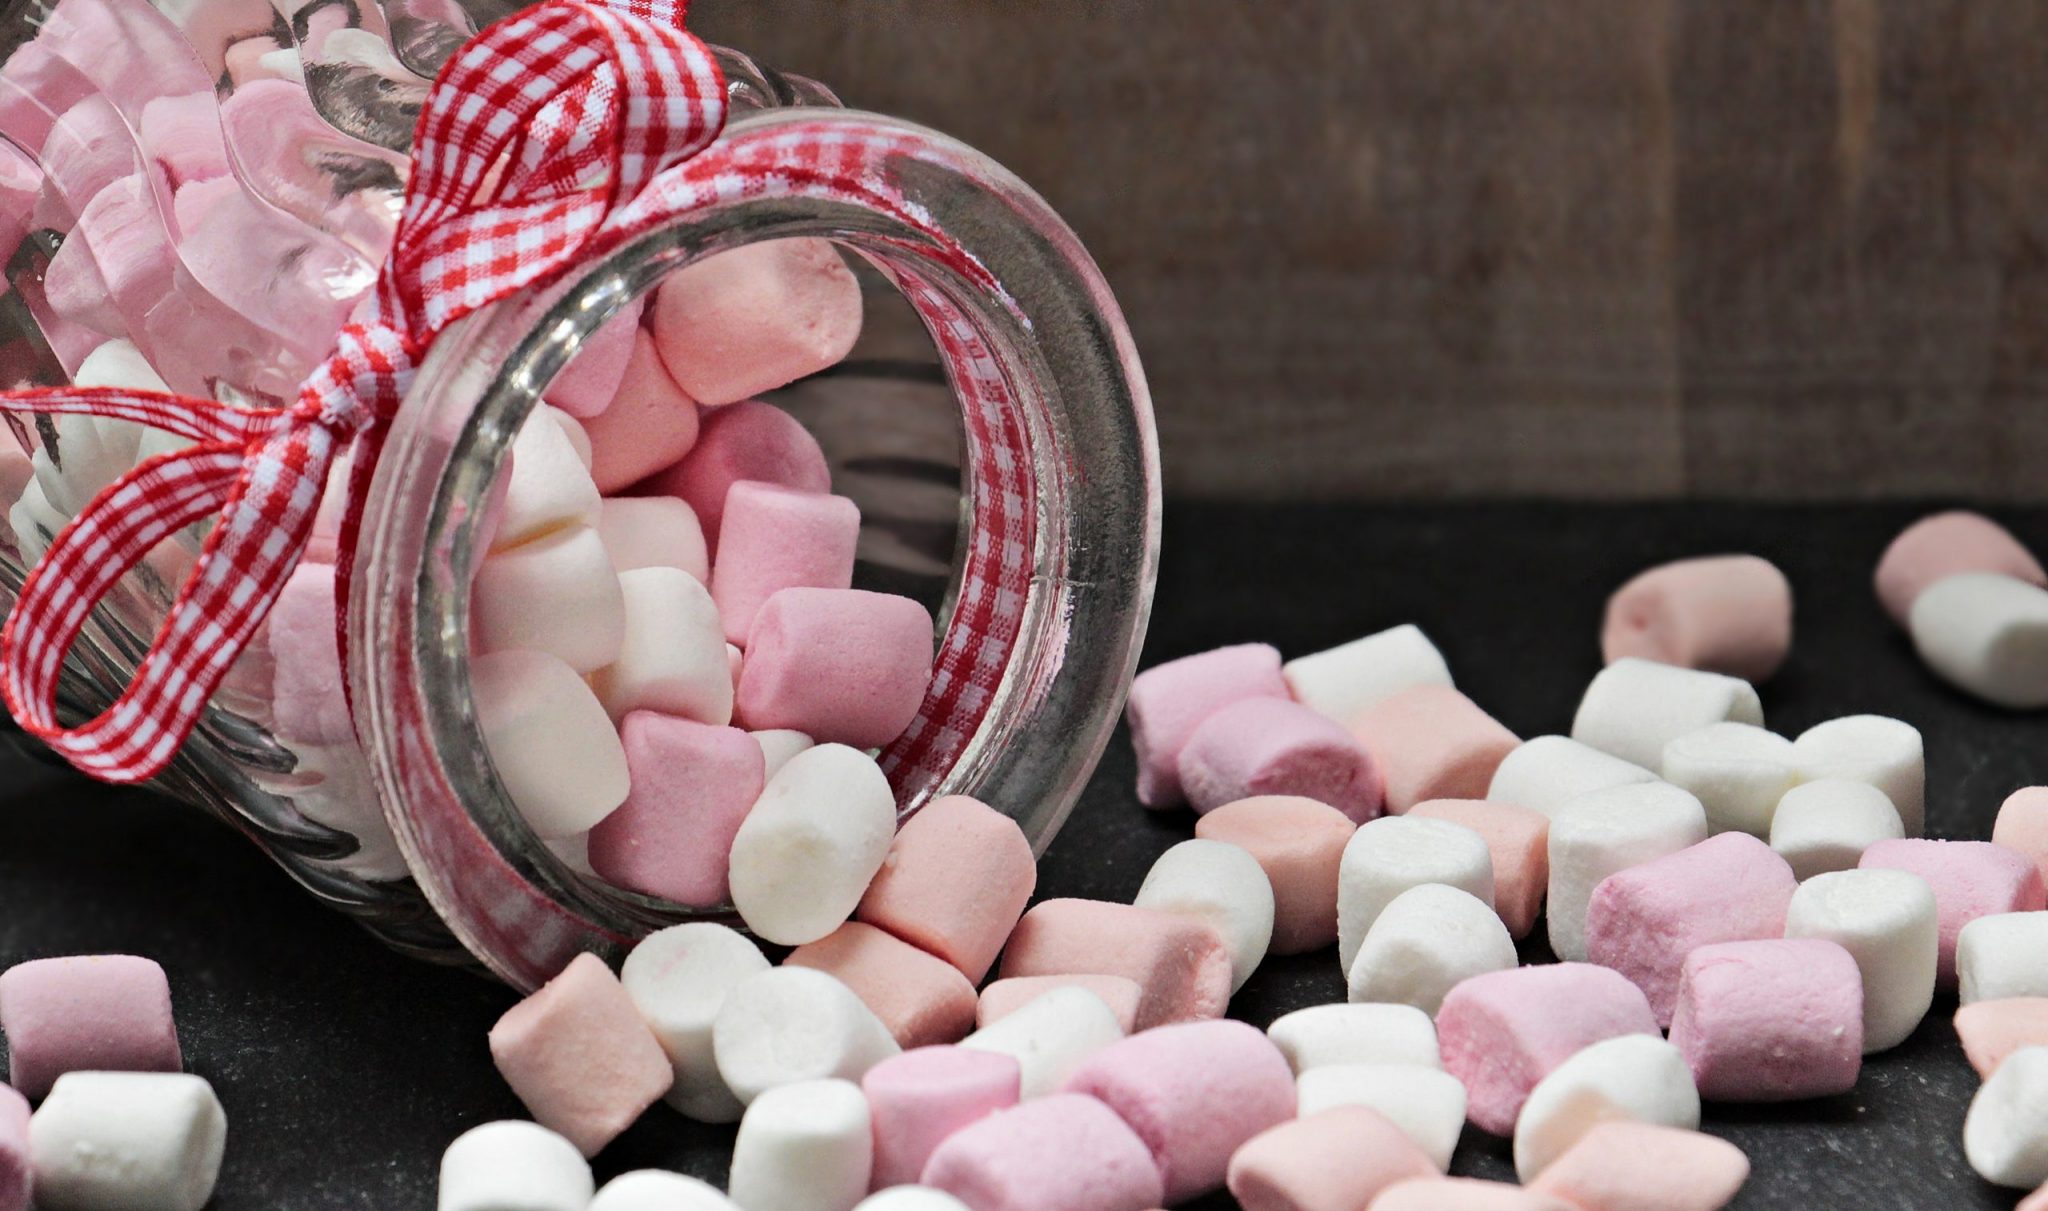 Featured image for “Marshmallow-Test”